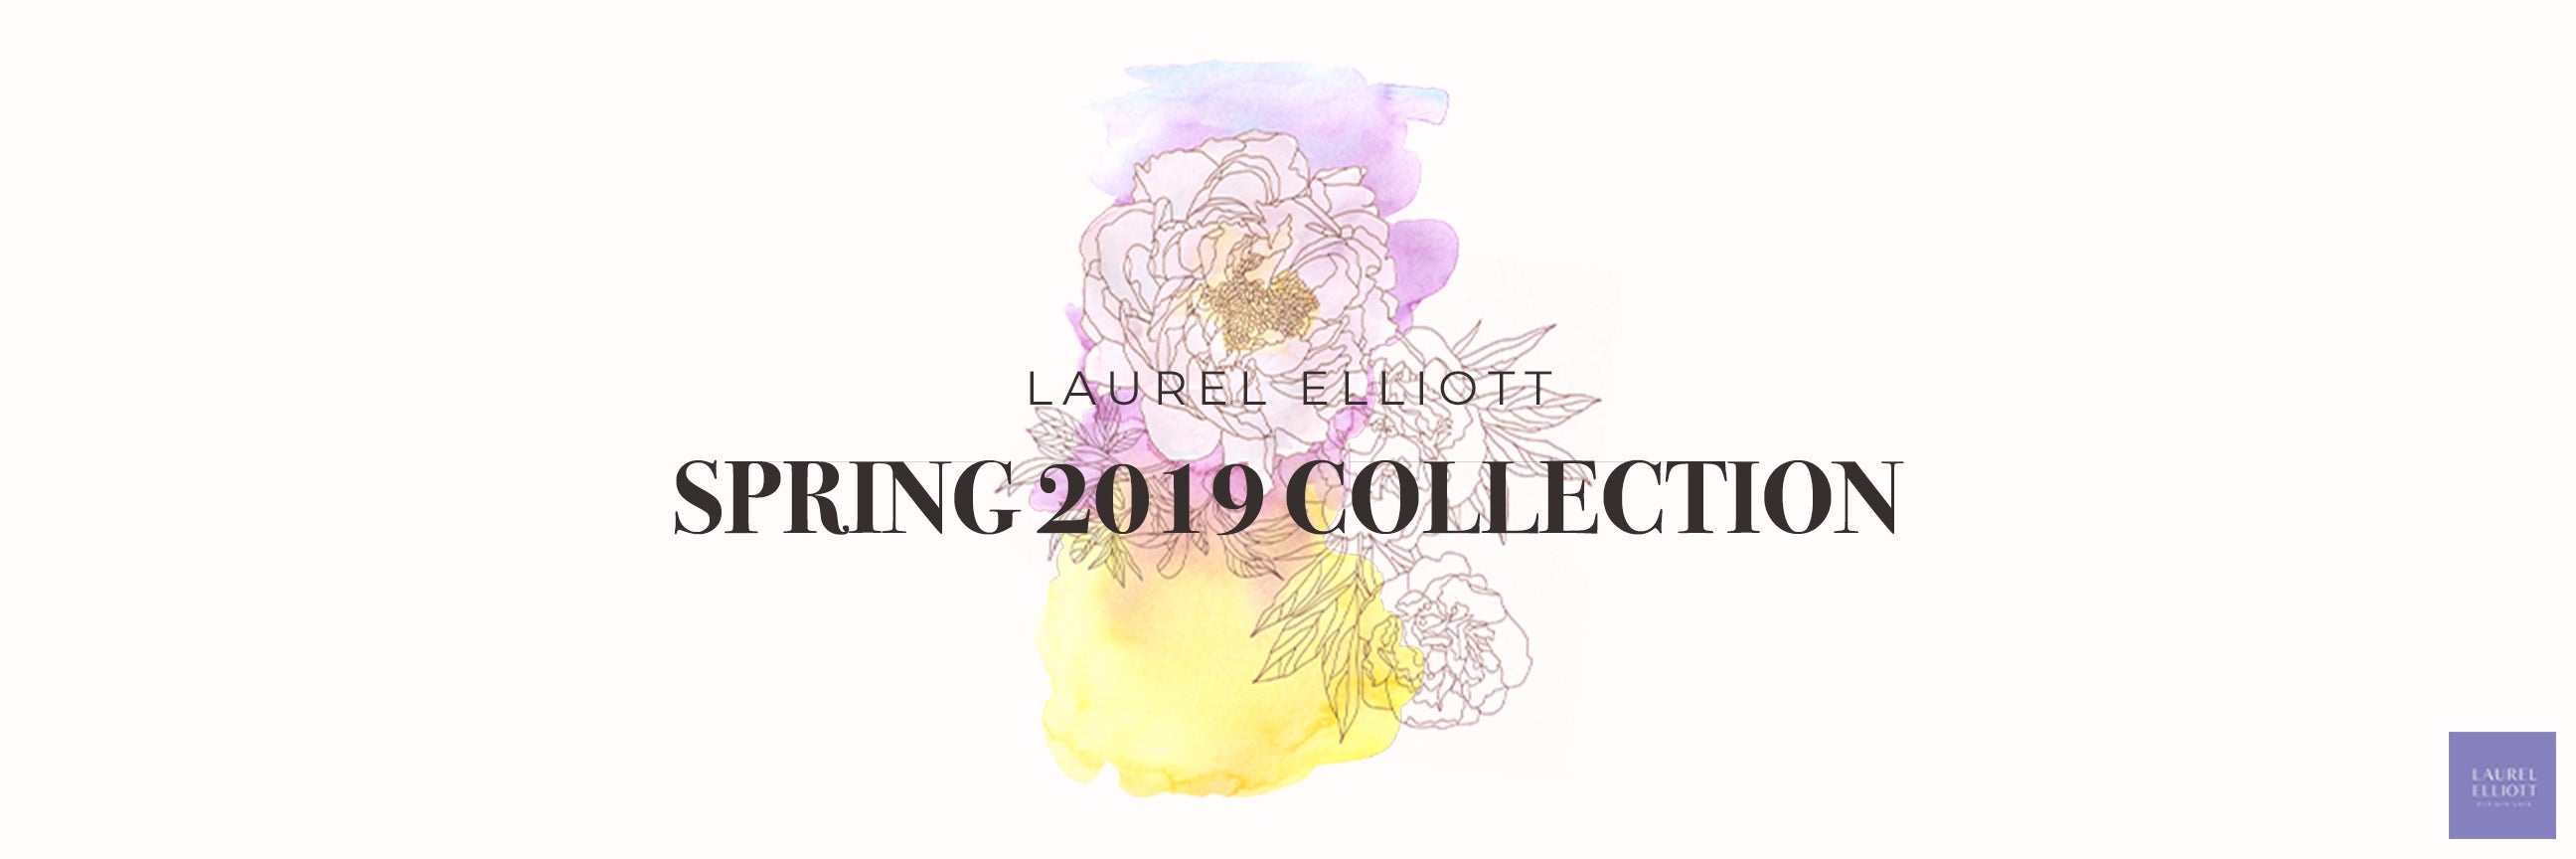 New Collection - Spring 2019